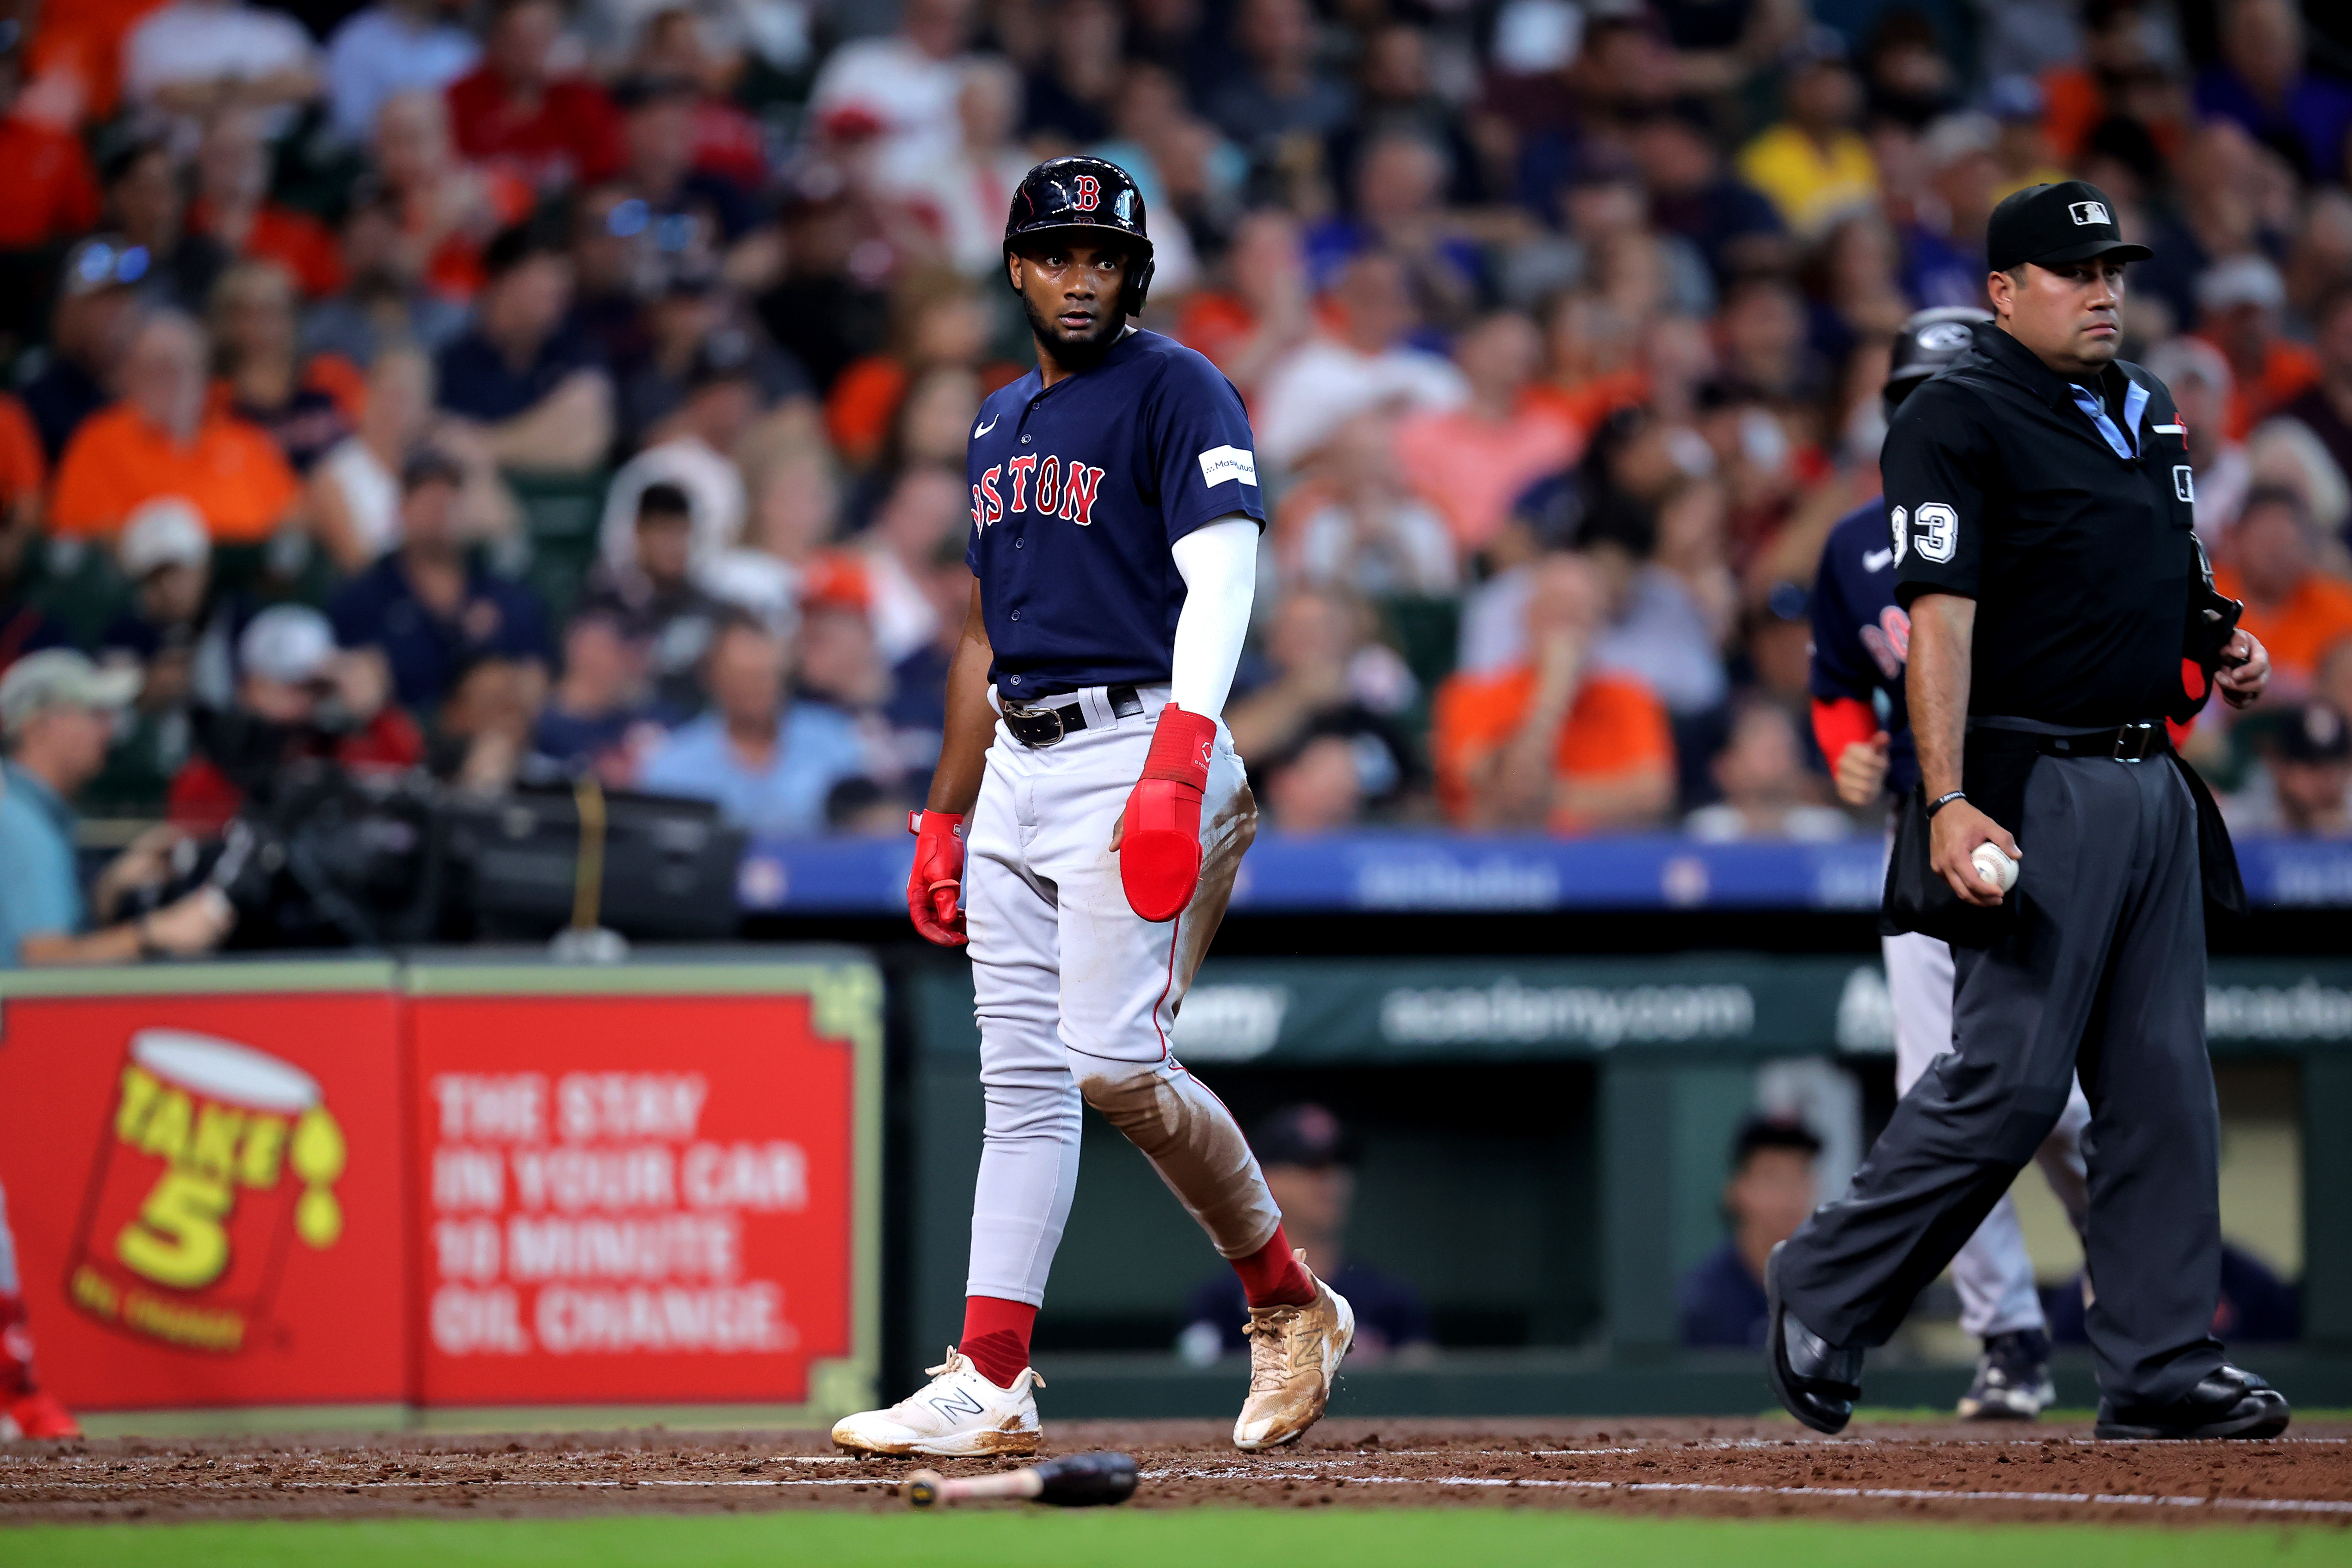 Red Sox bash 24 hits, take down Astros 17-1